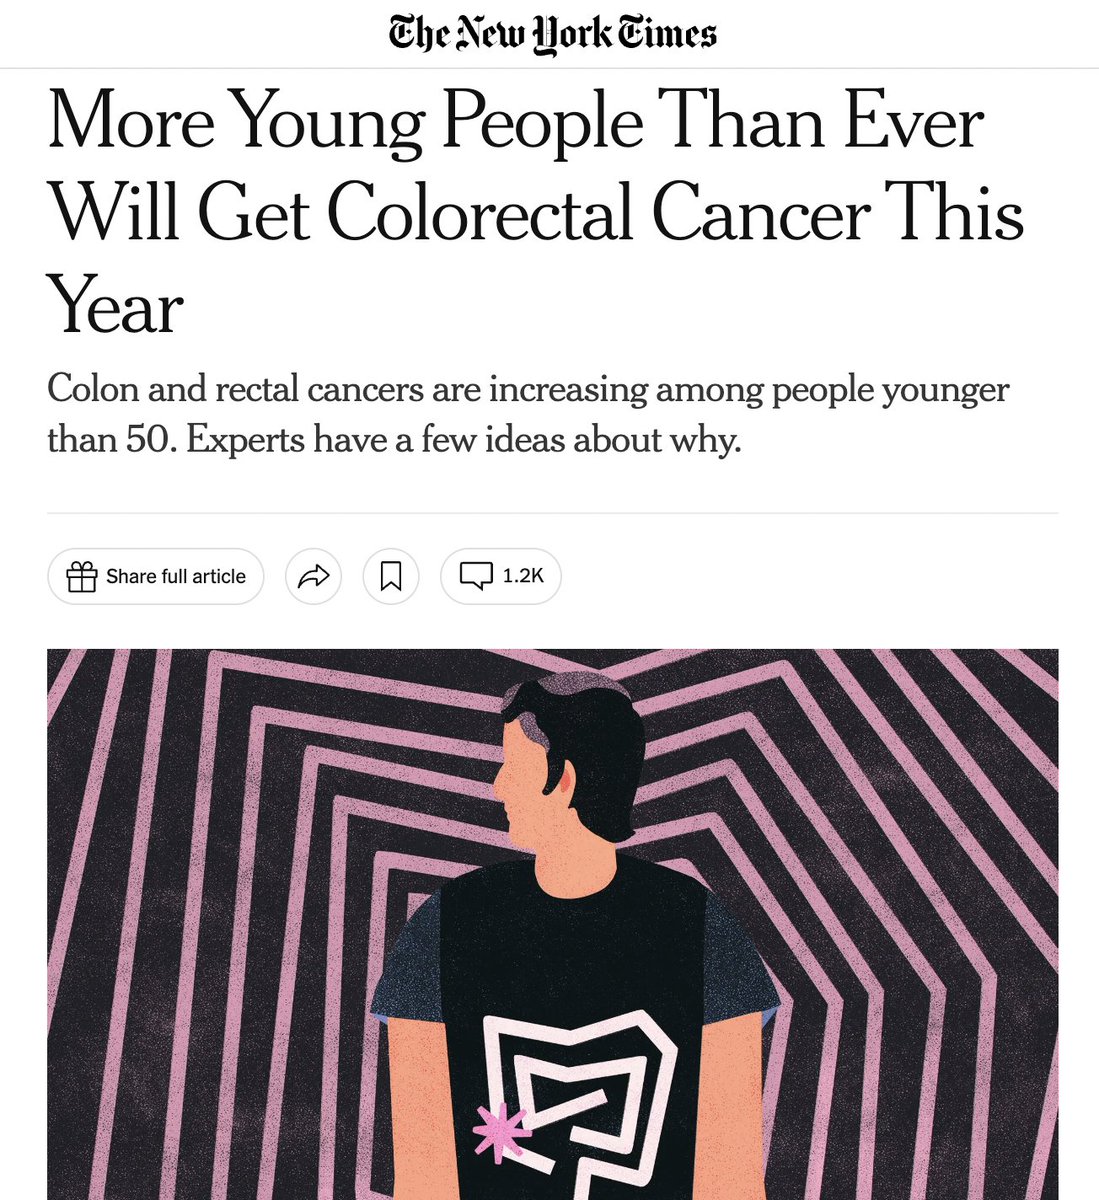 As much as I can't stand this statistic, it is really important it is getting major media attention. Thank you to the @newyorktimes for sharing #colorectalcancerawareness